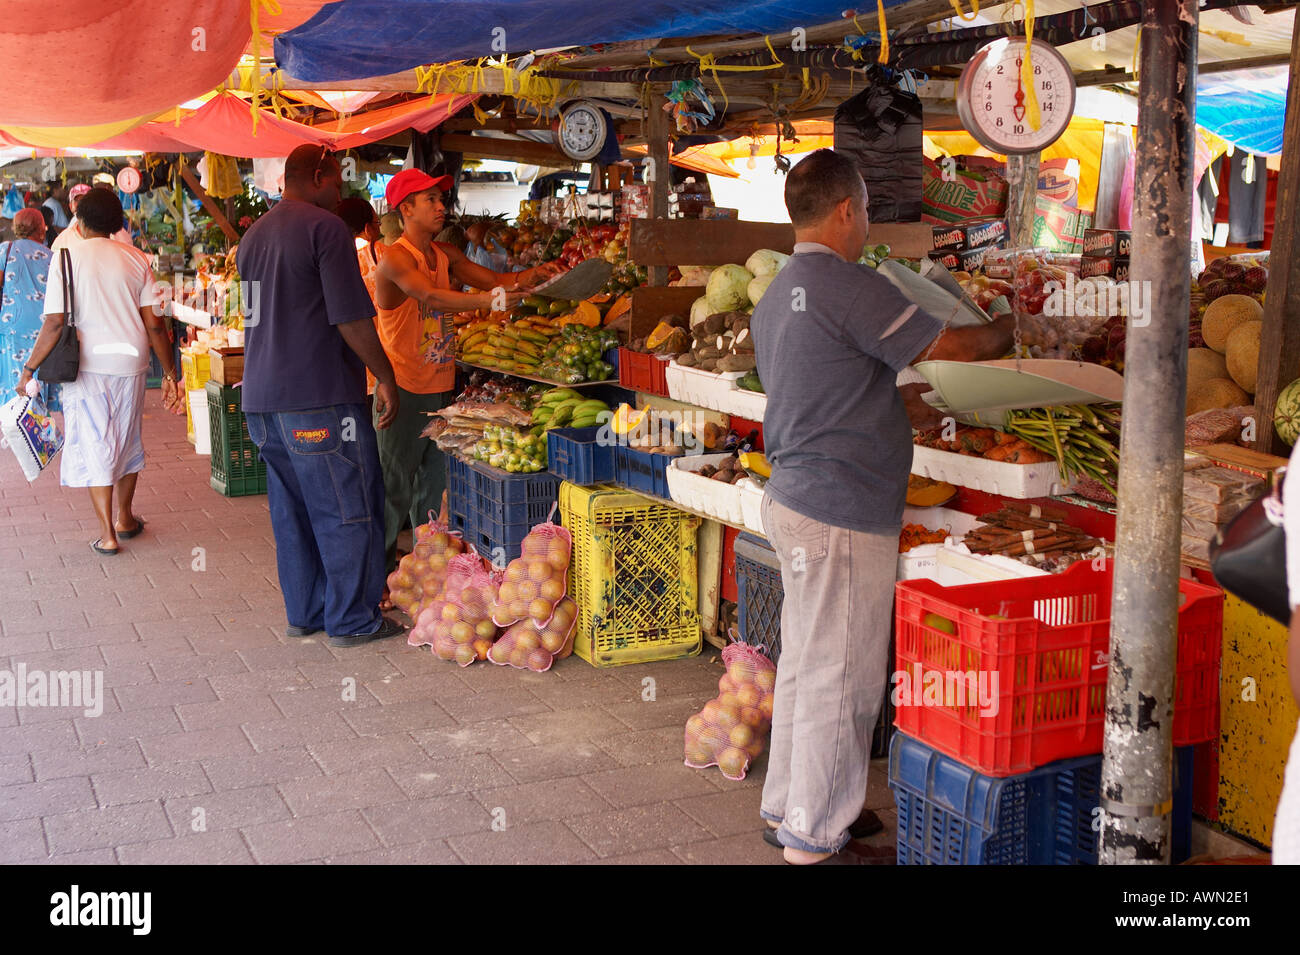 floating market willemstad curacao caribbean lesser Antilles west indies Stock Photo